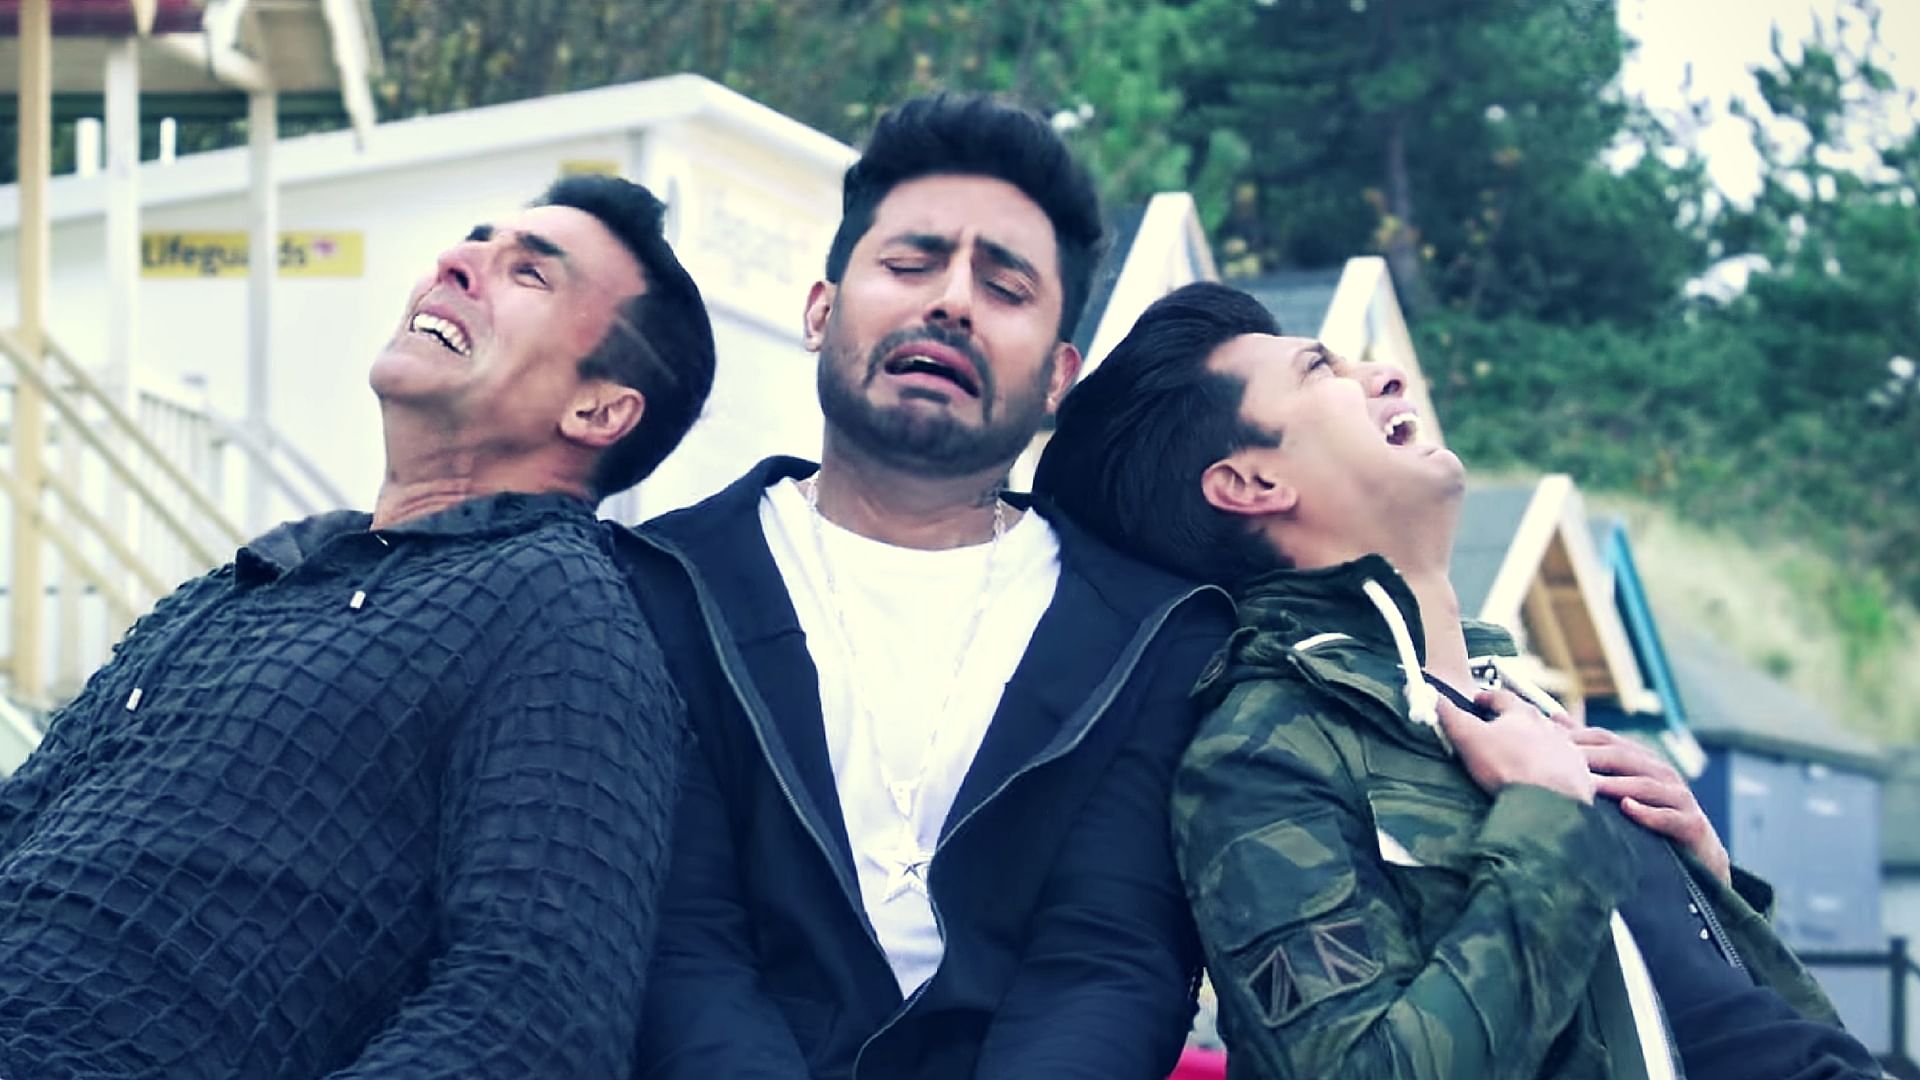 Akshay, Ritesh, Abhishek Cry Their Hearts Out, But We're Laughing